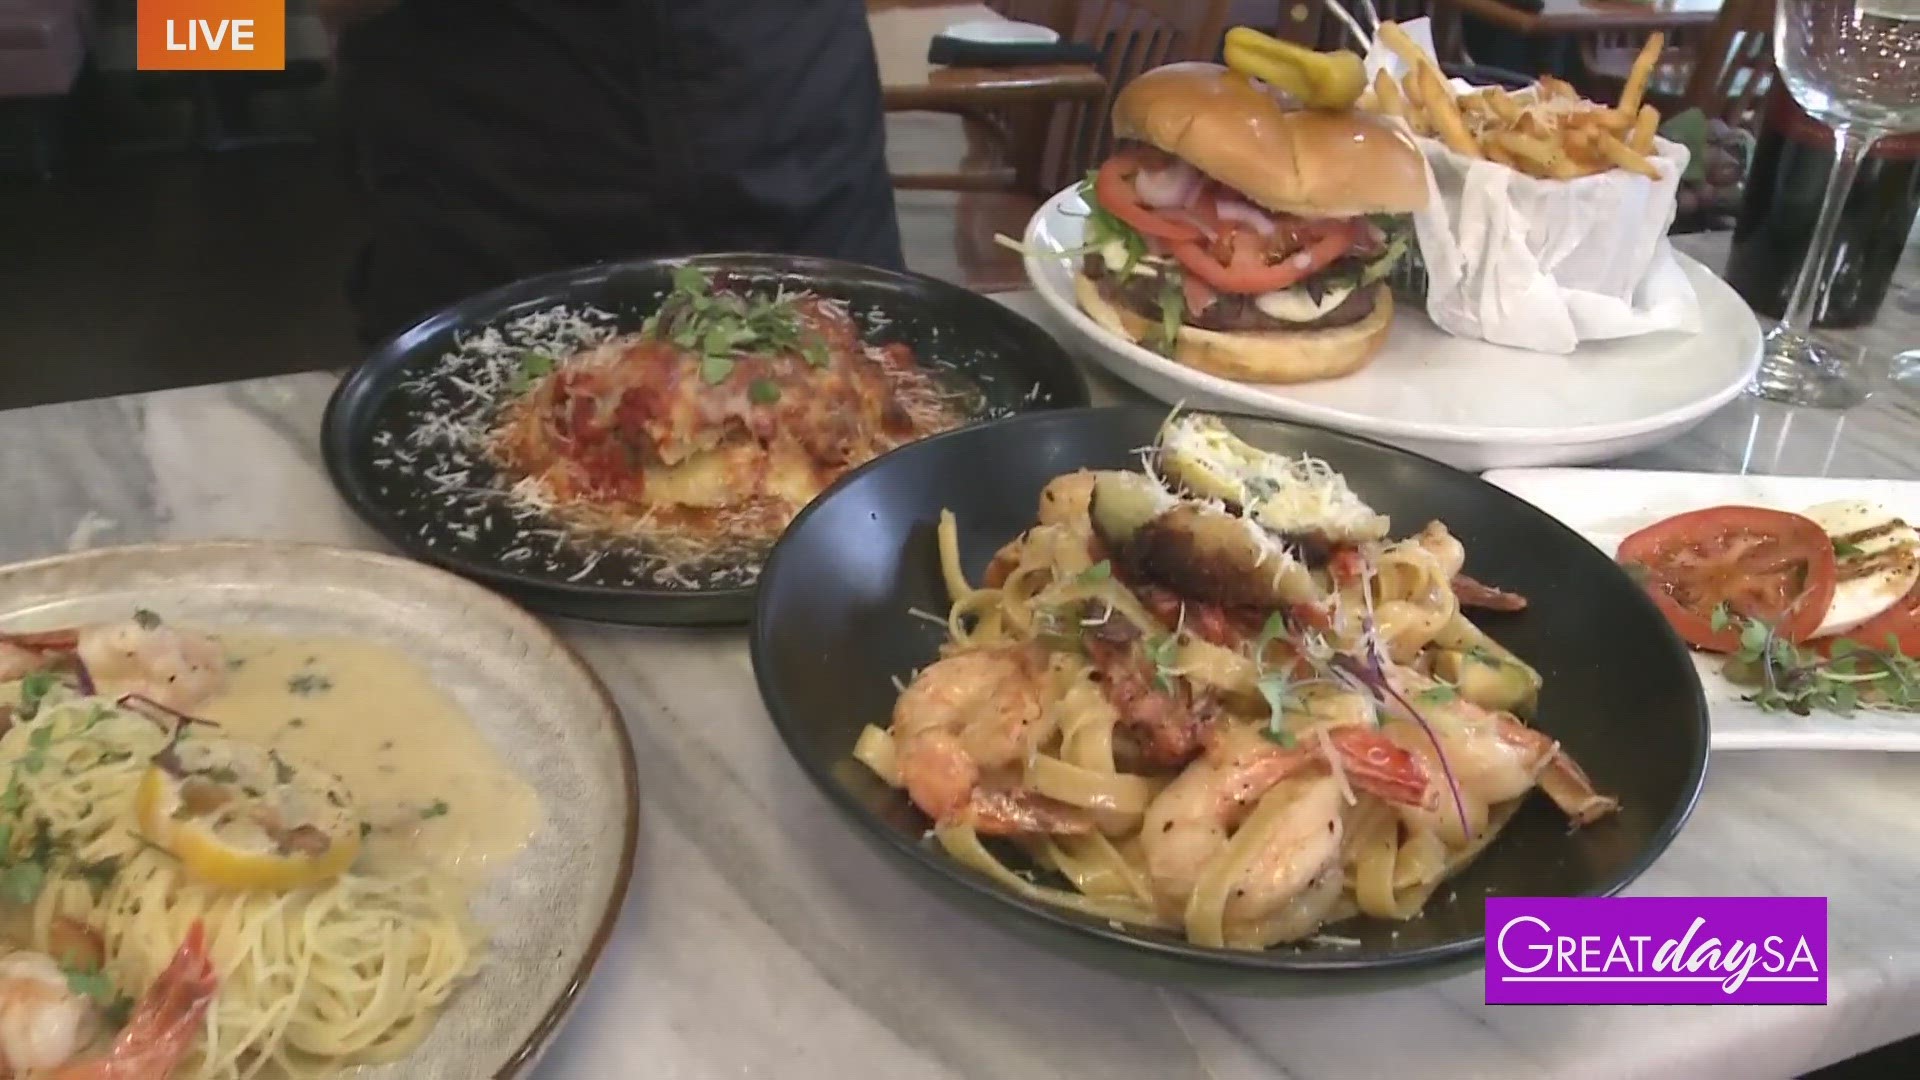 Roma stops by Naples Italian Restaurant to see what authentic foods they're offering.